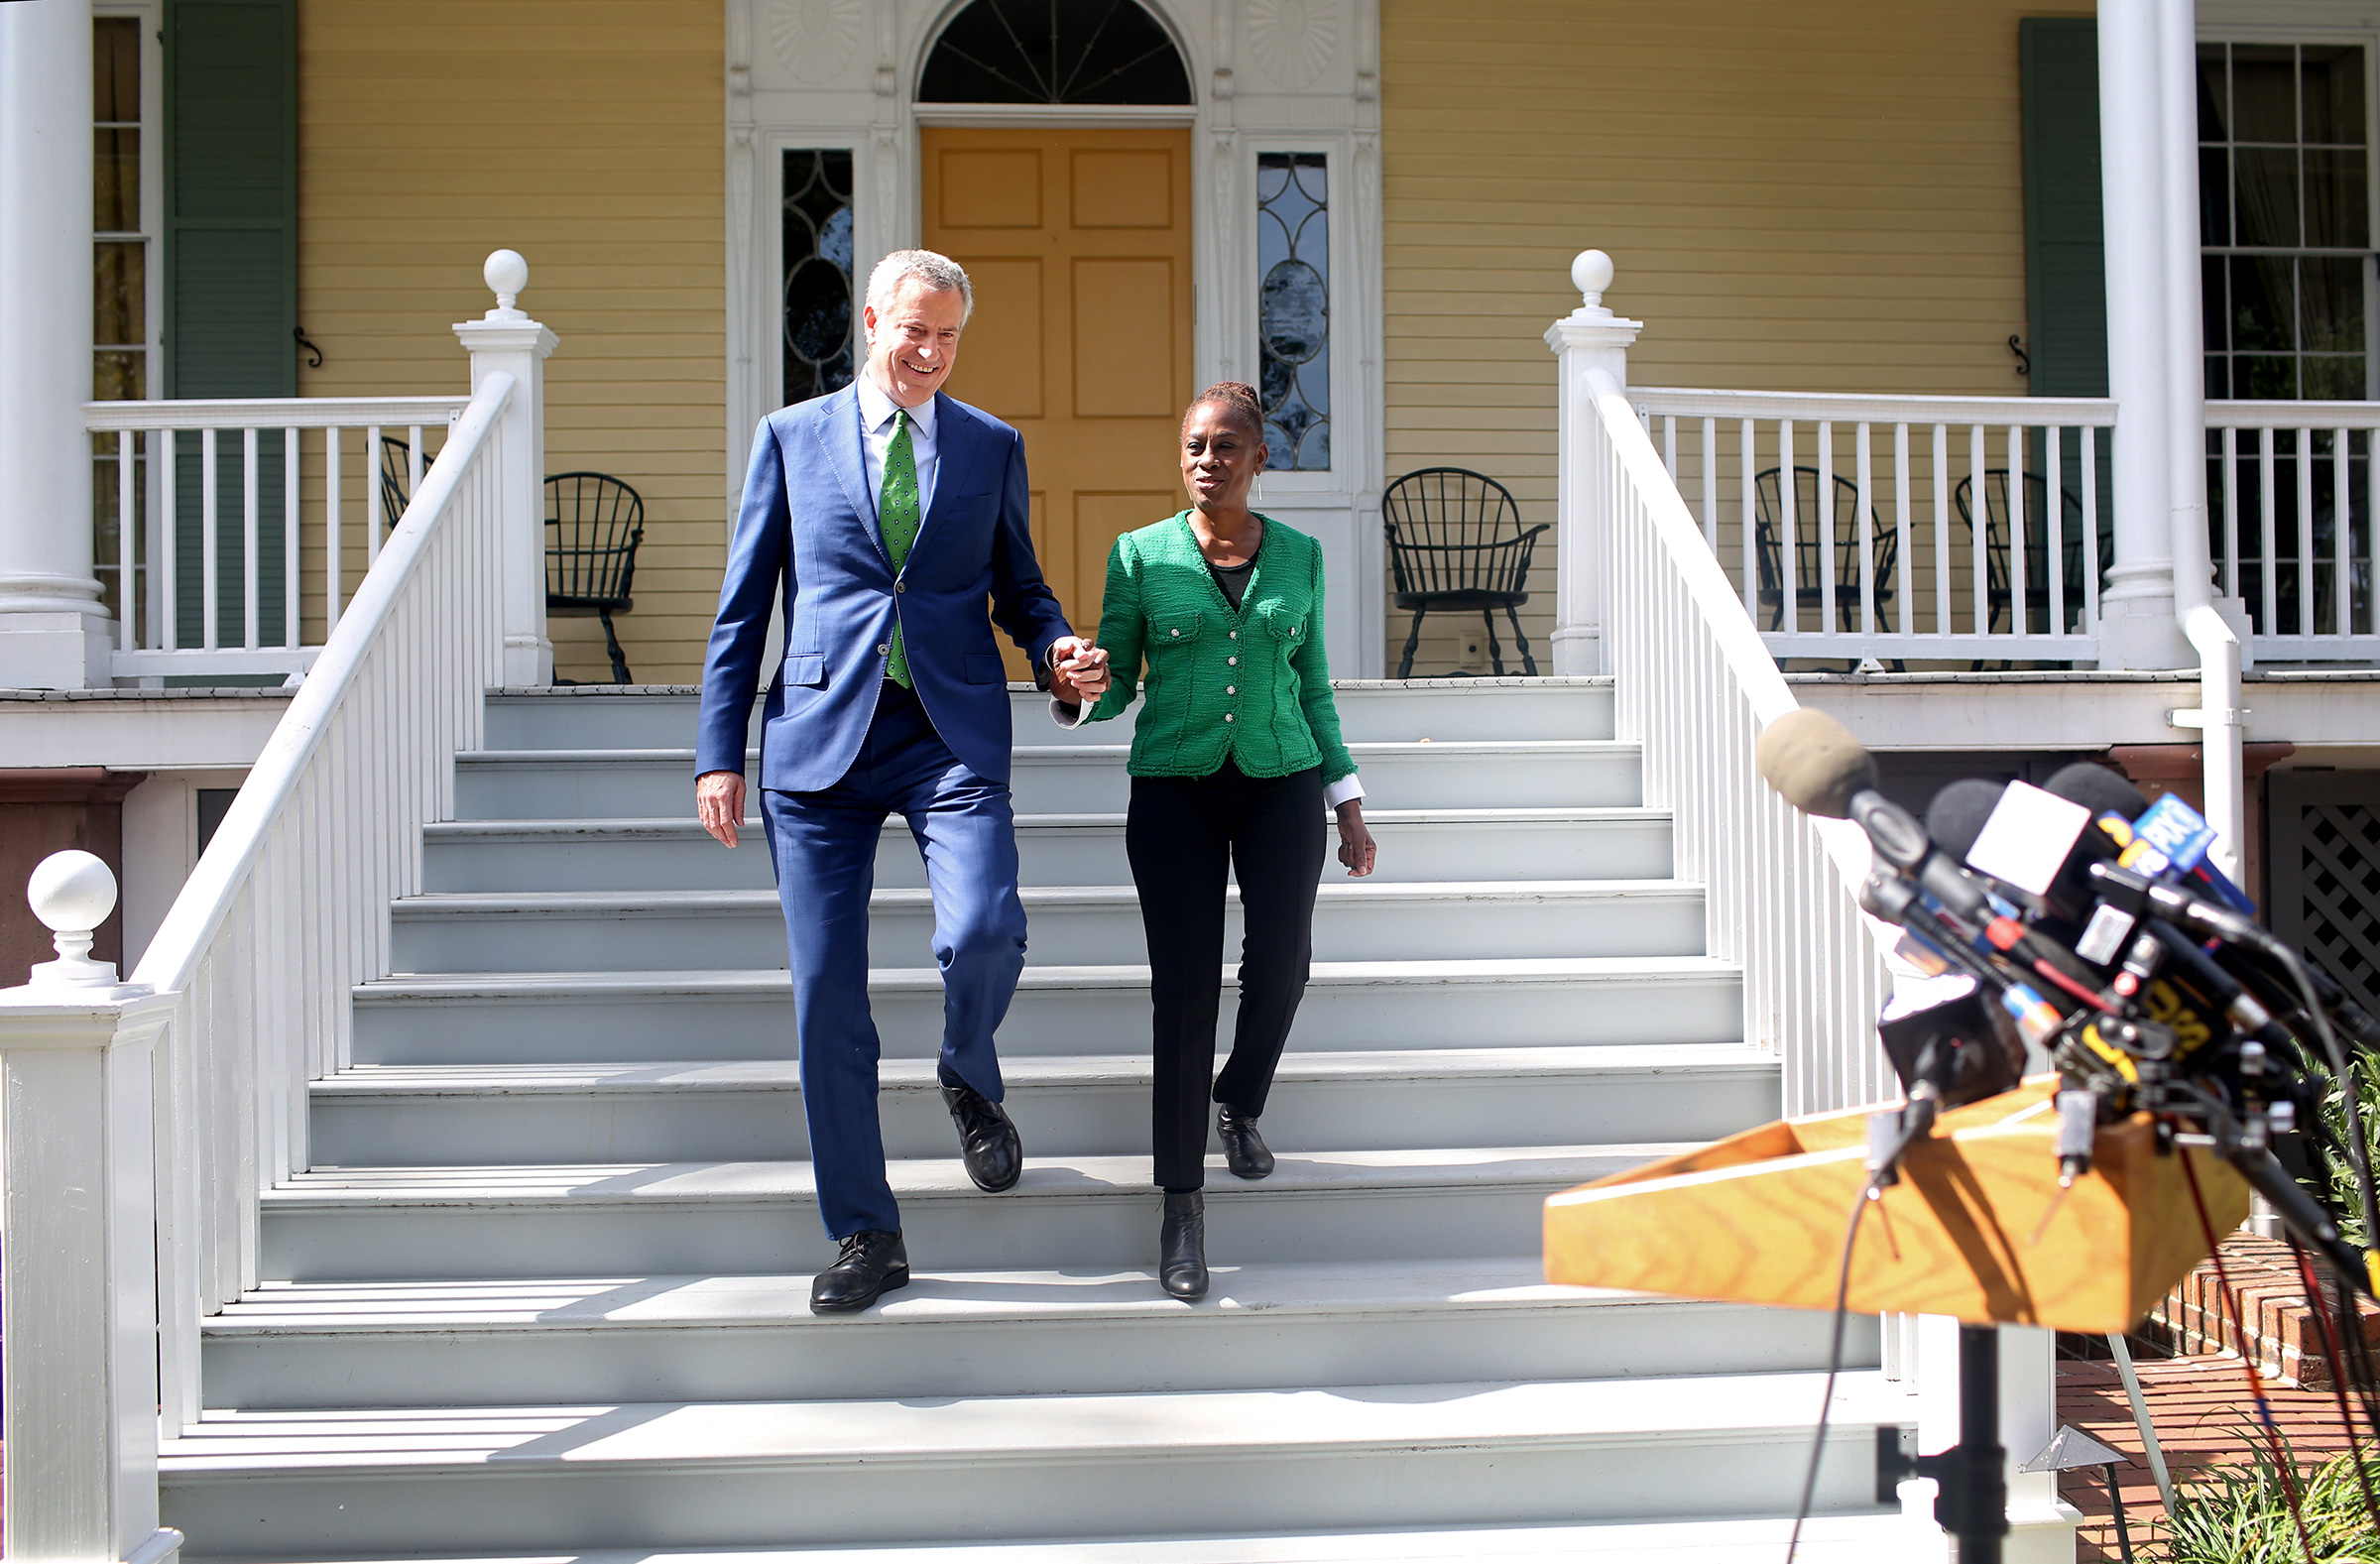 Bill de Blasio and Chirlane McCray arrive to a press conference in New York City on Sept. 20, 2019. (Yana Paskova—Getty Images)